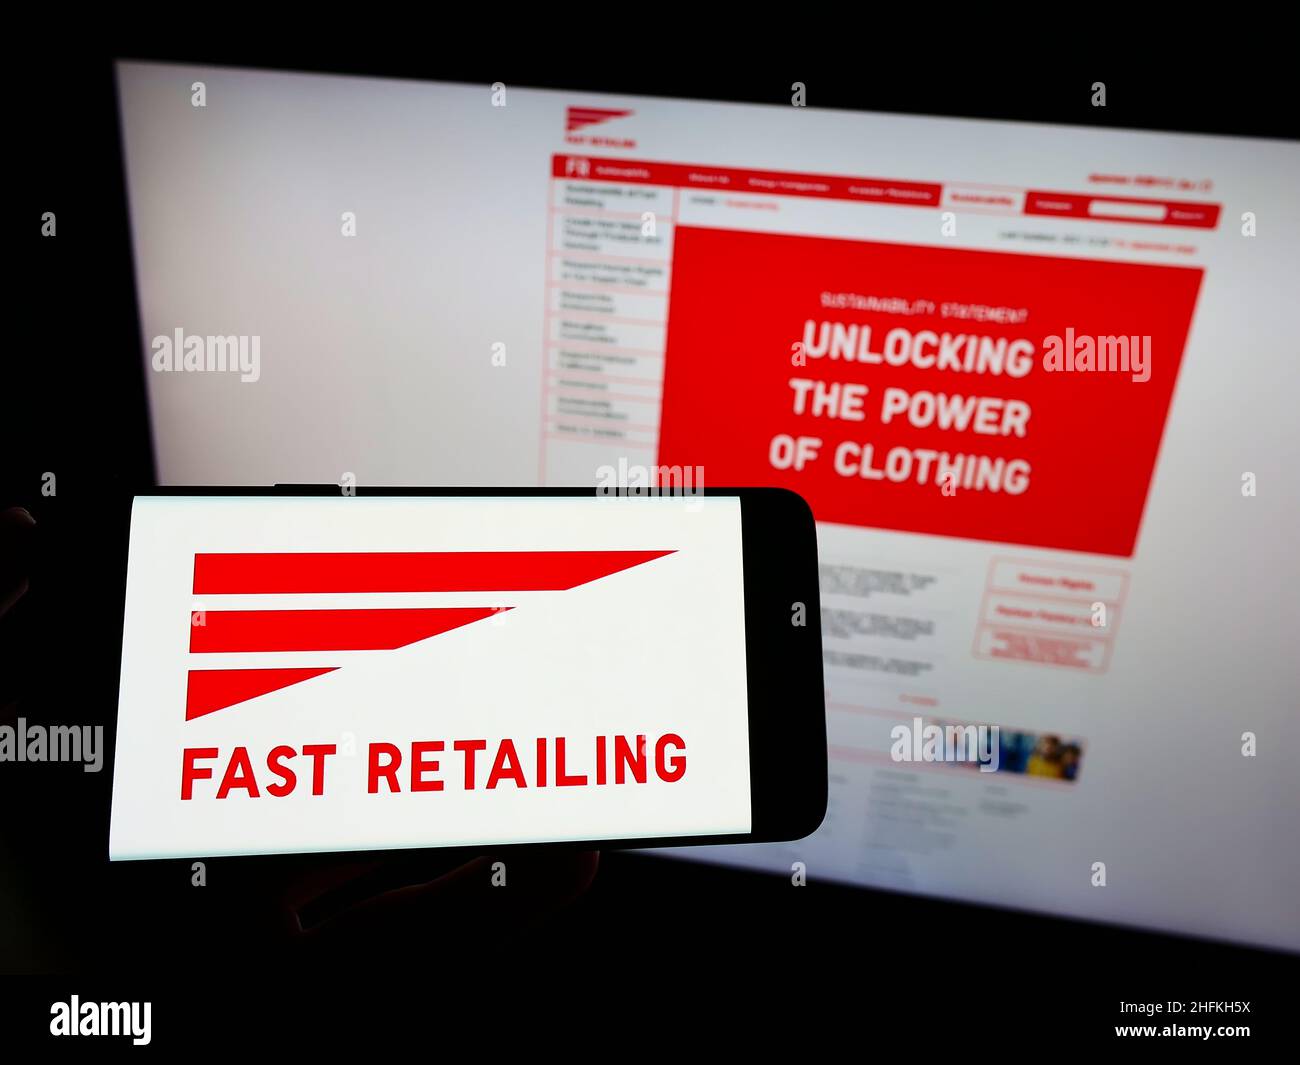 Person holding smartphone with logo of Japanese retail company K.K. Fast Retailing on screen in front of website. Focus on phone display. Stock Photo